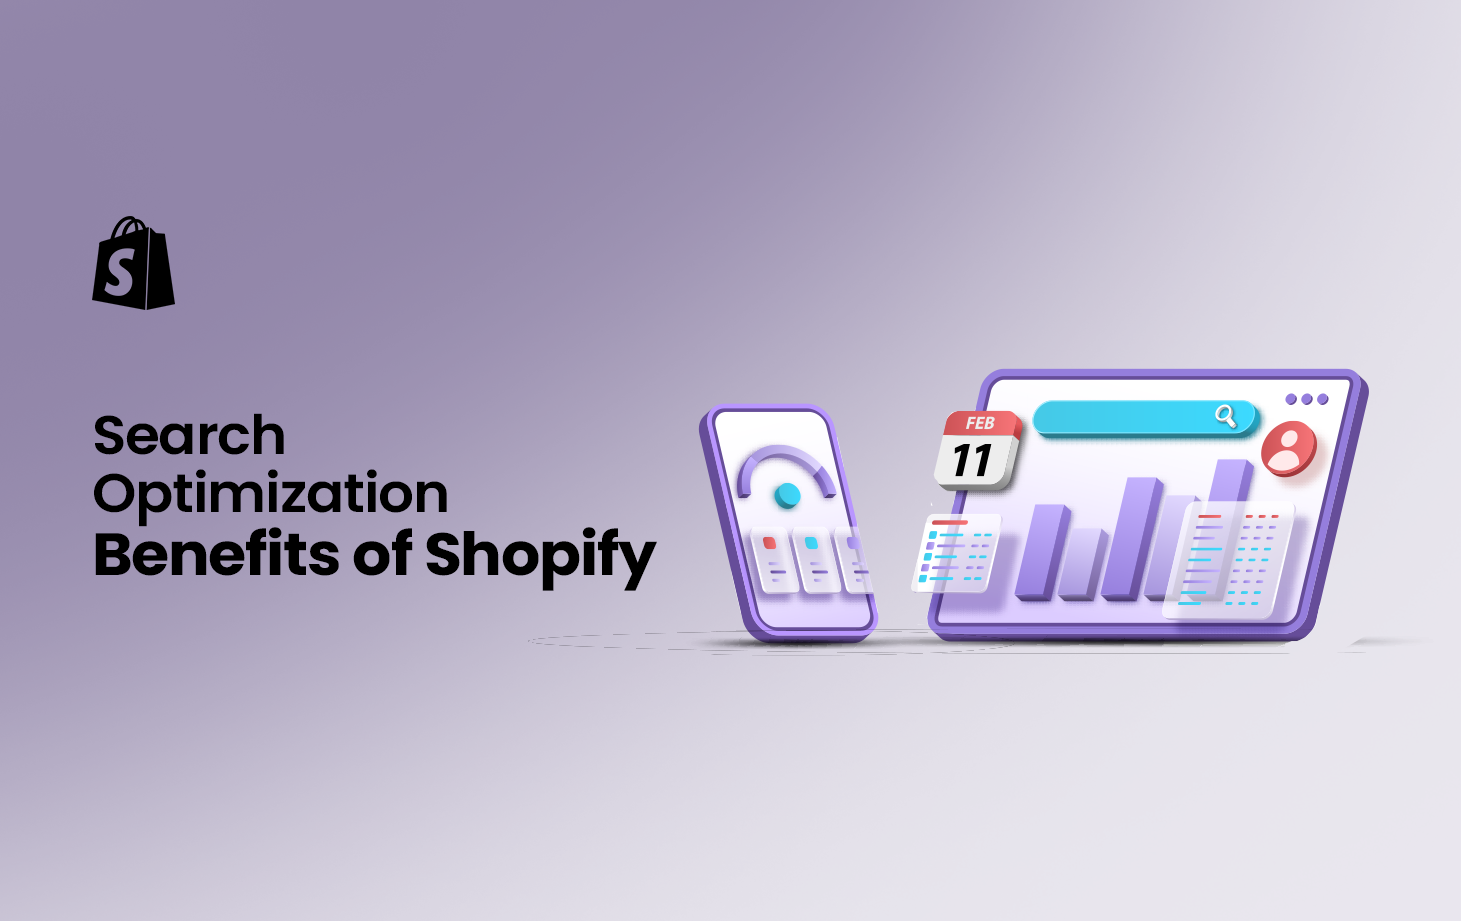 Is Shopify Good For SEO?